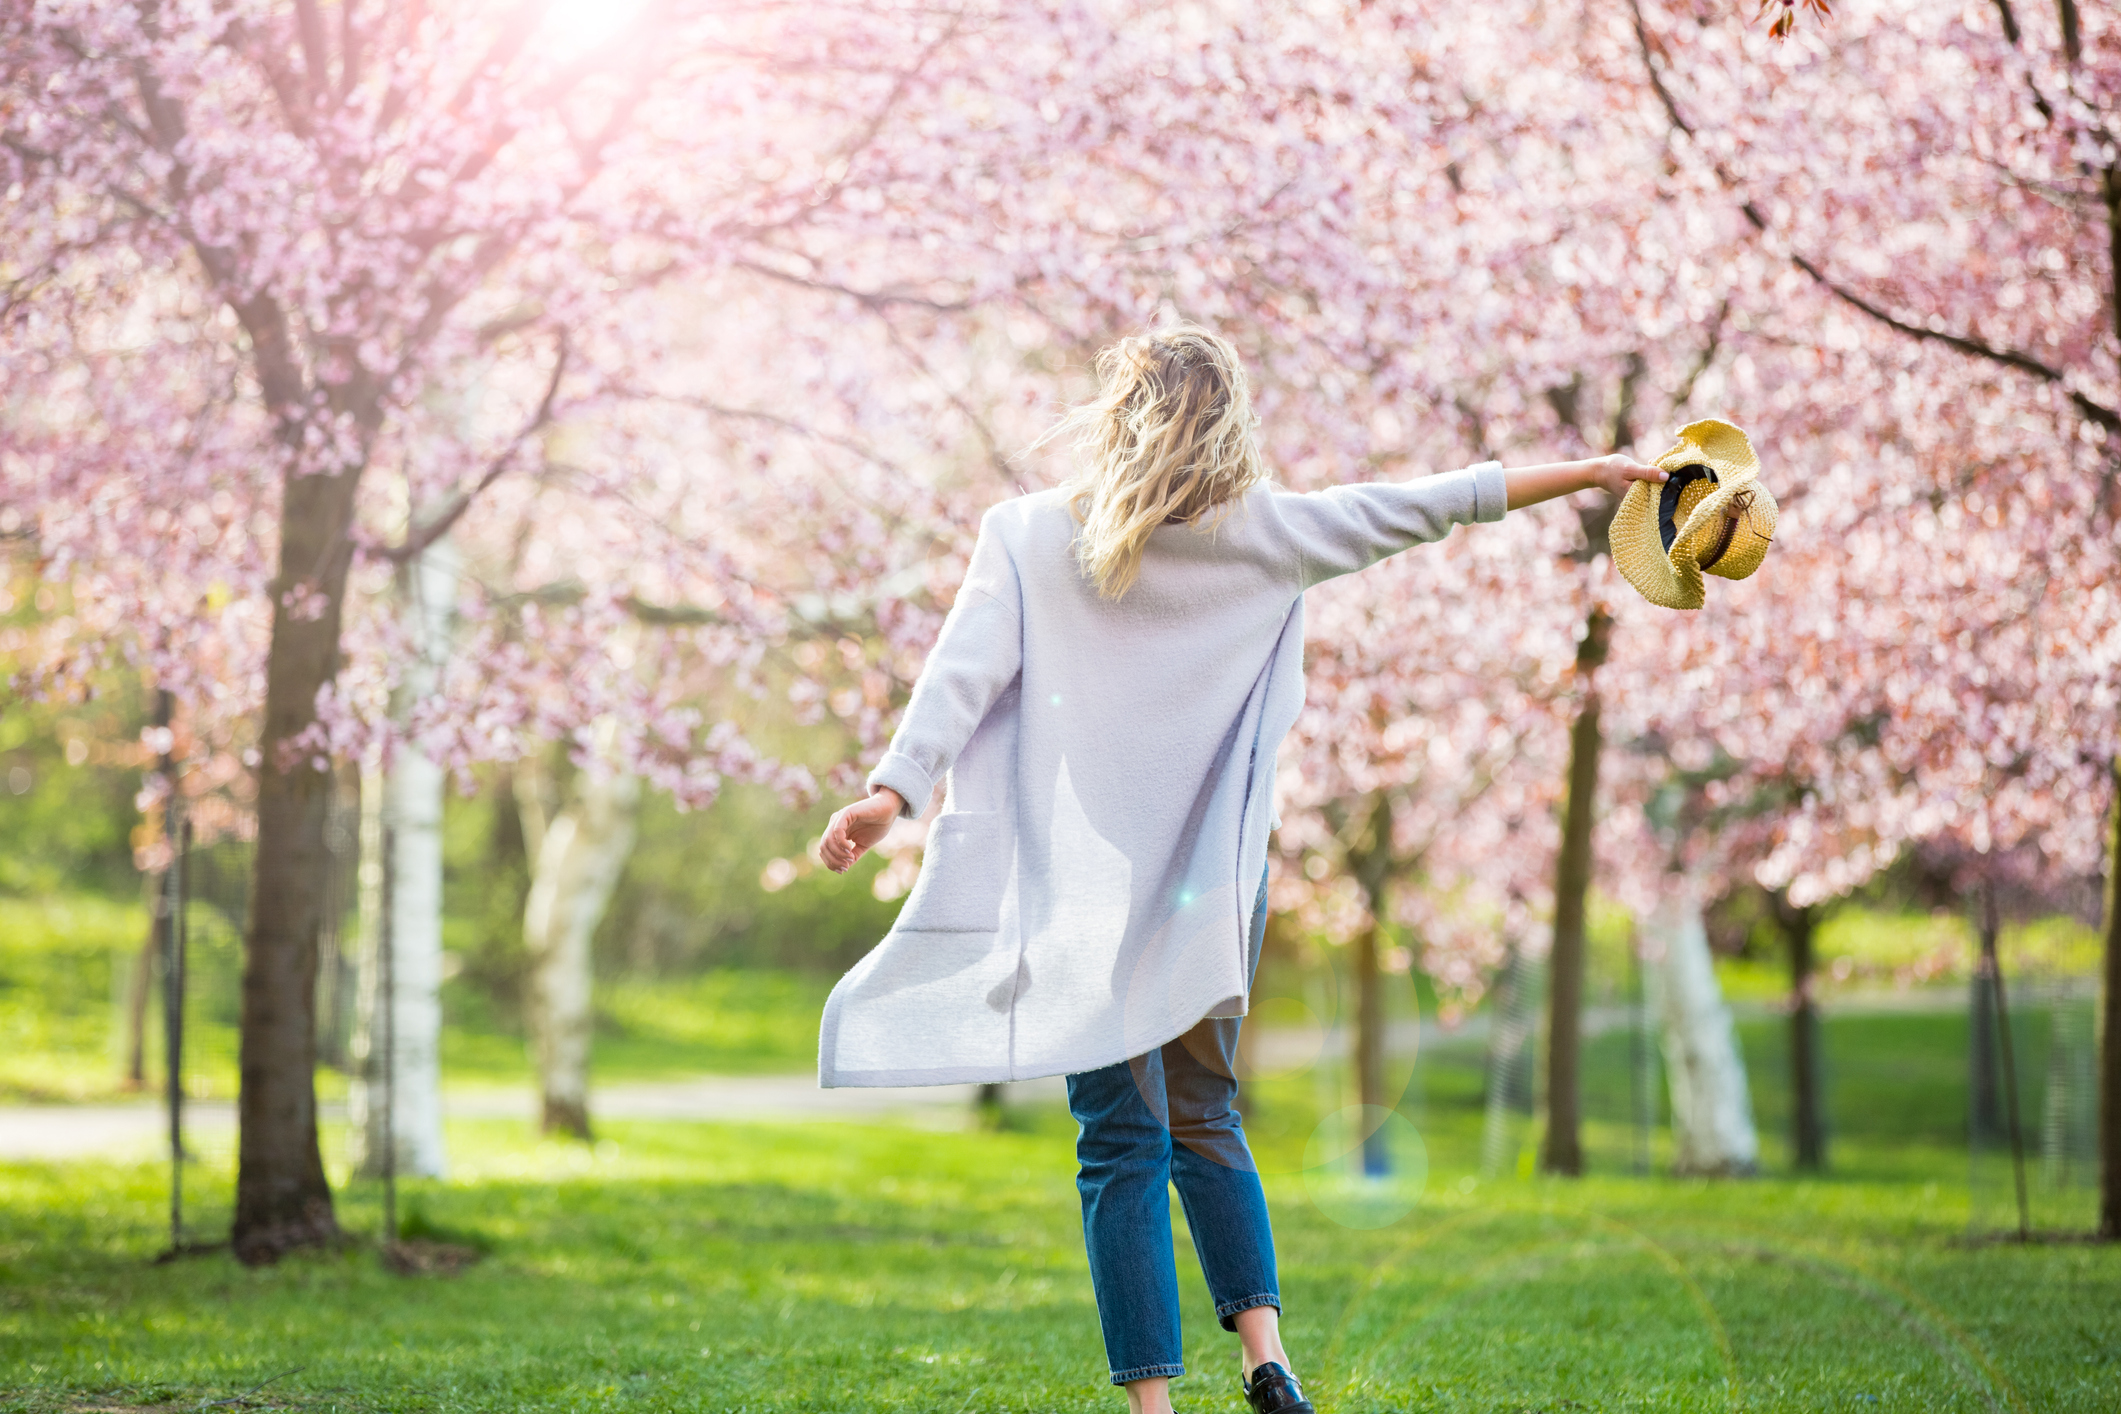 Female taking her hat off dramatically in a cherry blossom forest